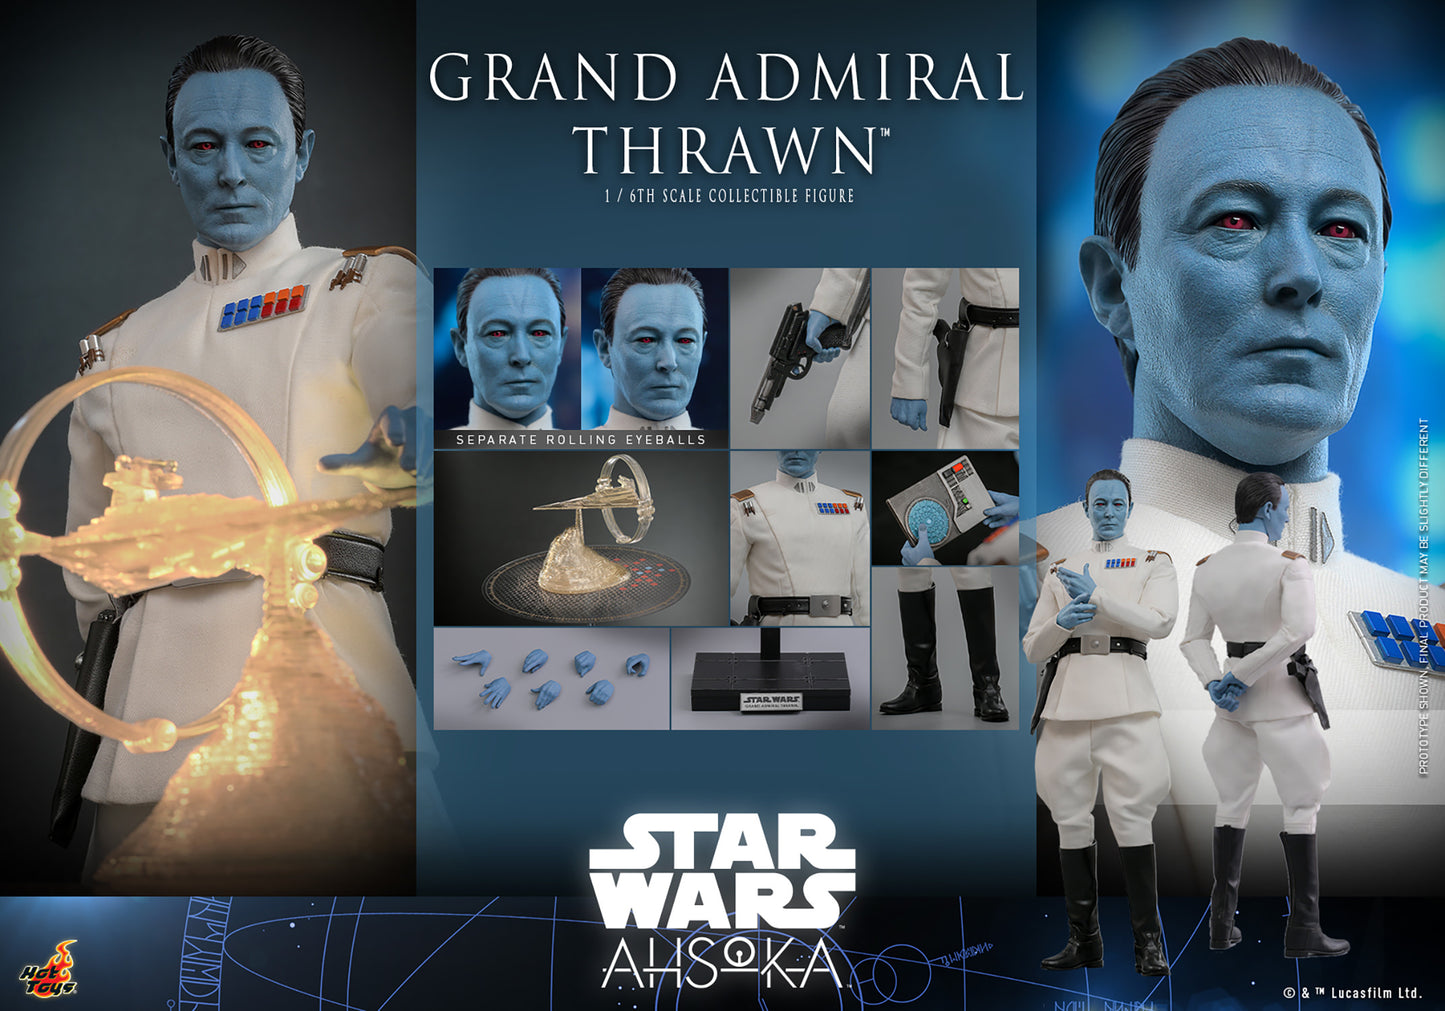 Grand Admiral Thrawn 1/6 Scale Figure by Hot Toys